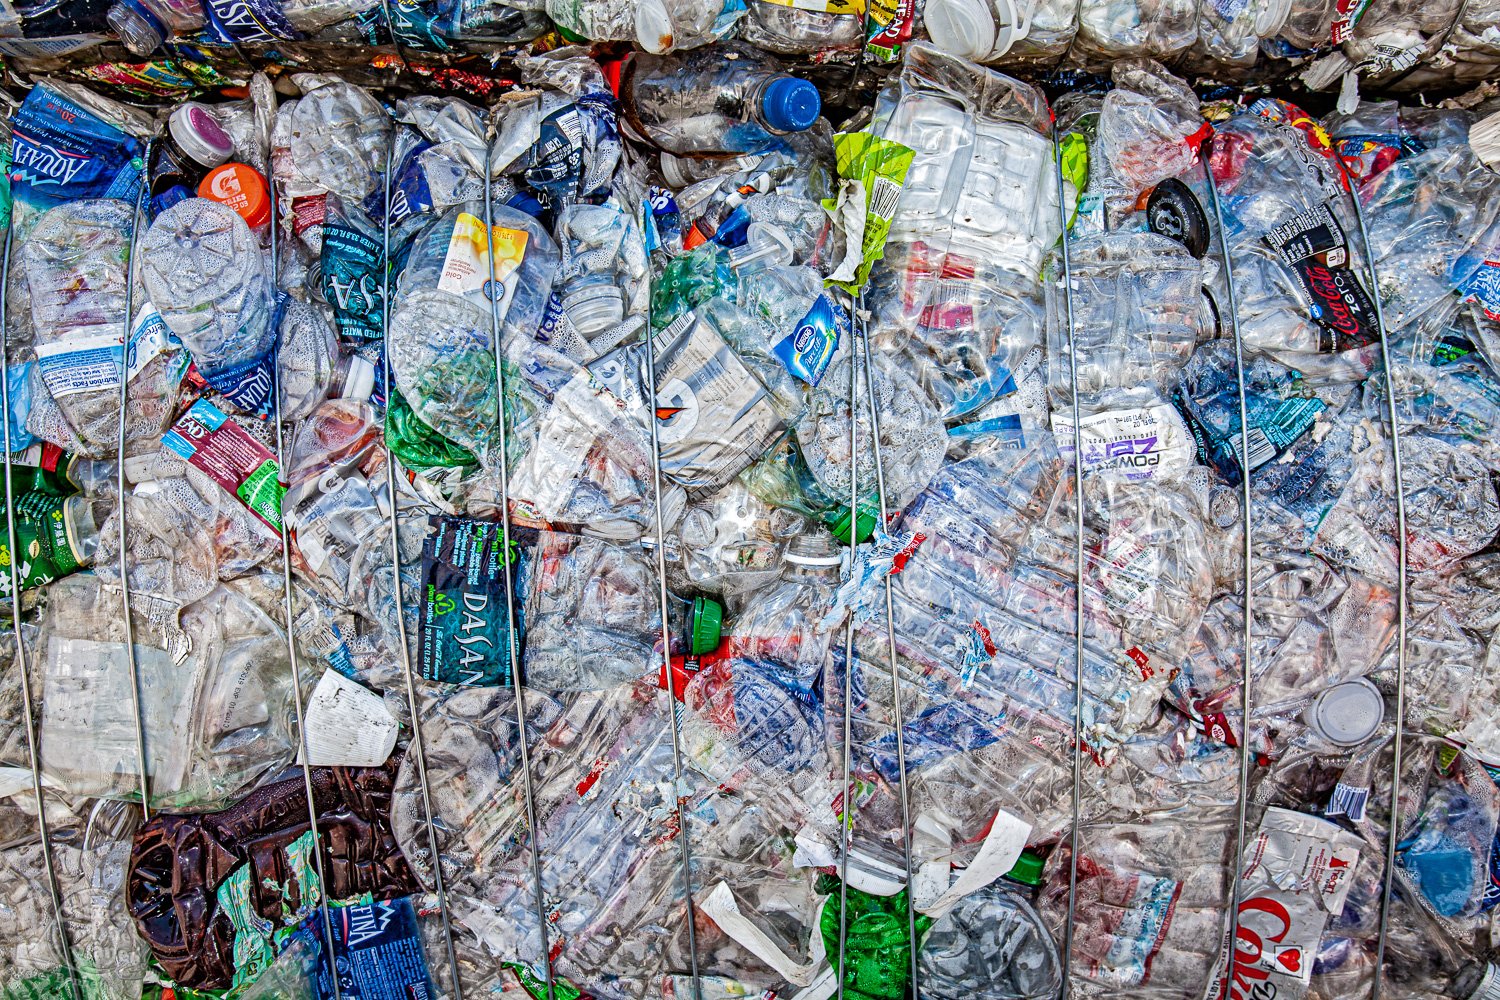  Stacks of Polyethylene terephthalate (PET or PETE) bottles, at a Recycling Center 